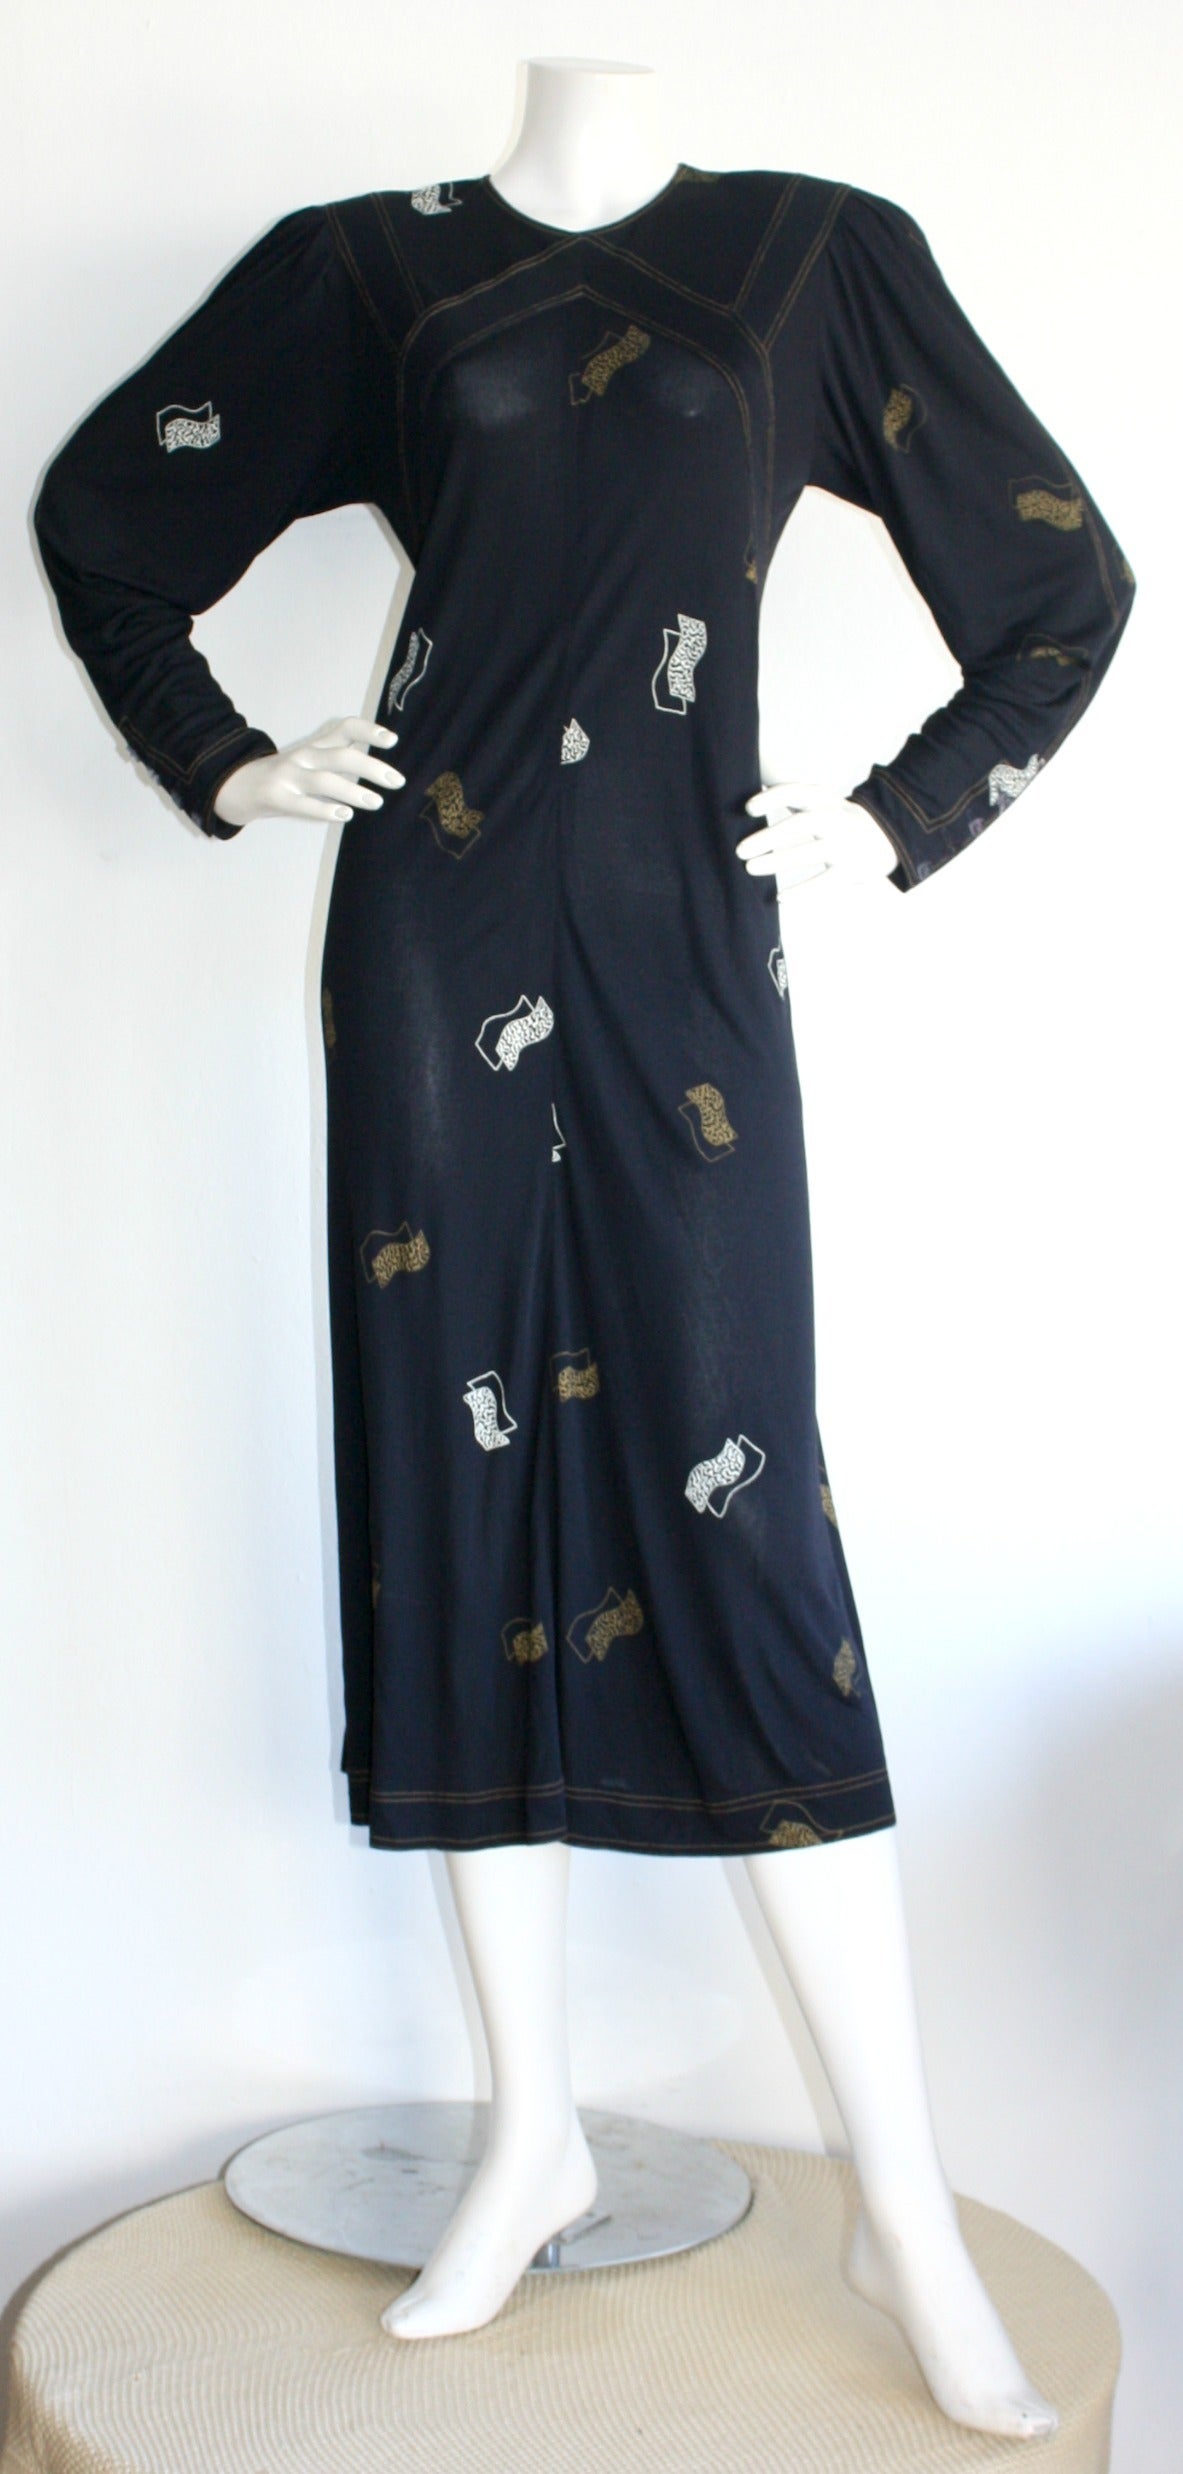 Beautiful vintage Jean Muir navy blue dress, with unique fan prints, and functional lucite buttons at cuffs and back neck. Beautiful 1930s style. Easily transitions from day to night. Silk/Rayon. In great condition. Will fit many sizes, due to fit.